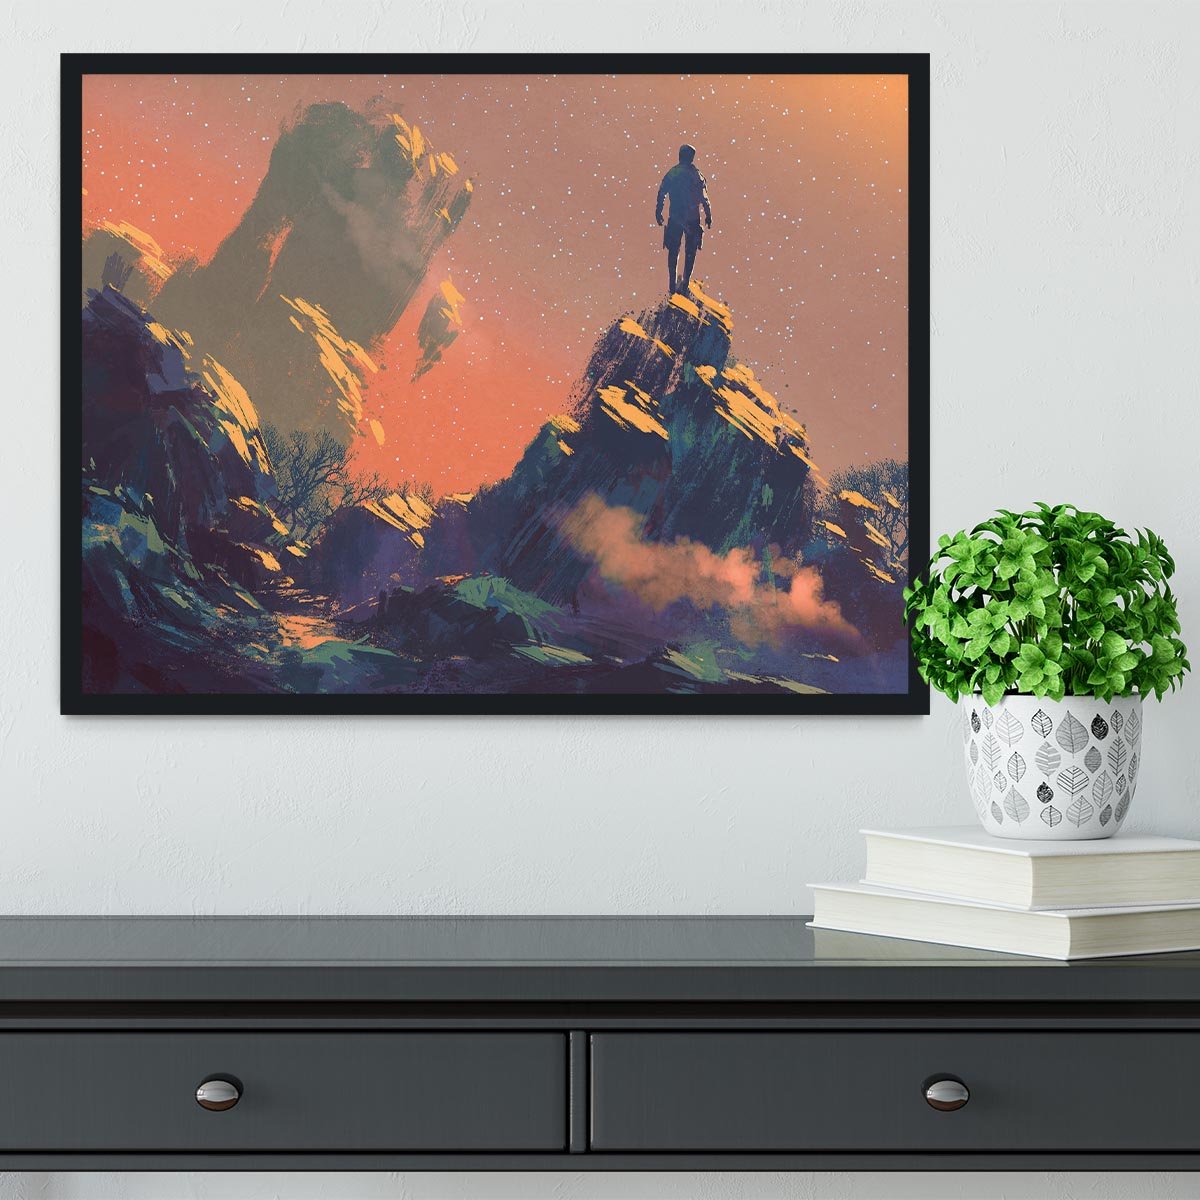 Top of the hill watching the stars Framed Print - Canvas Art Rocks - 2